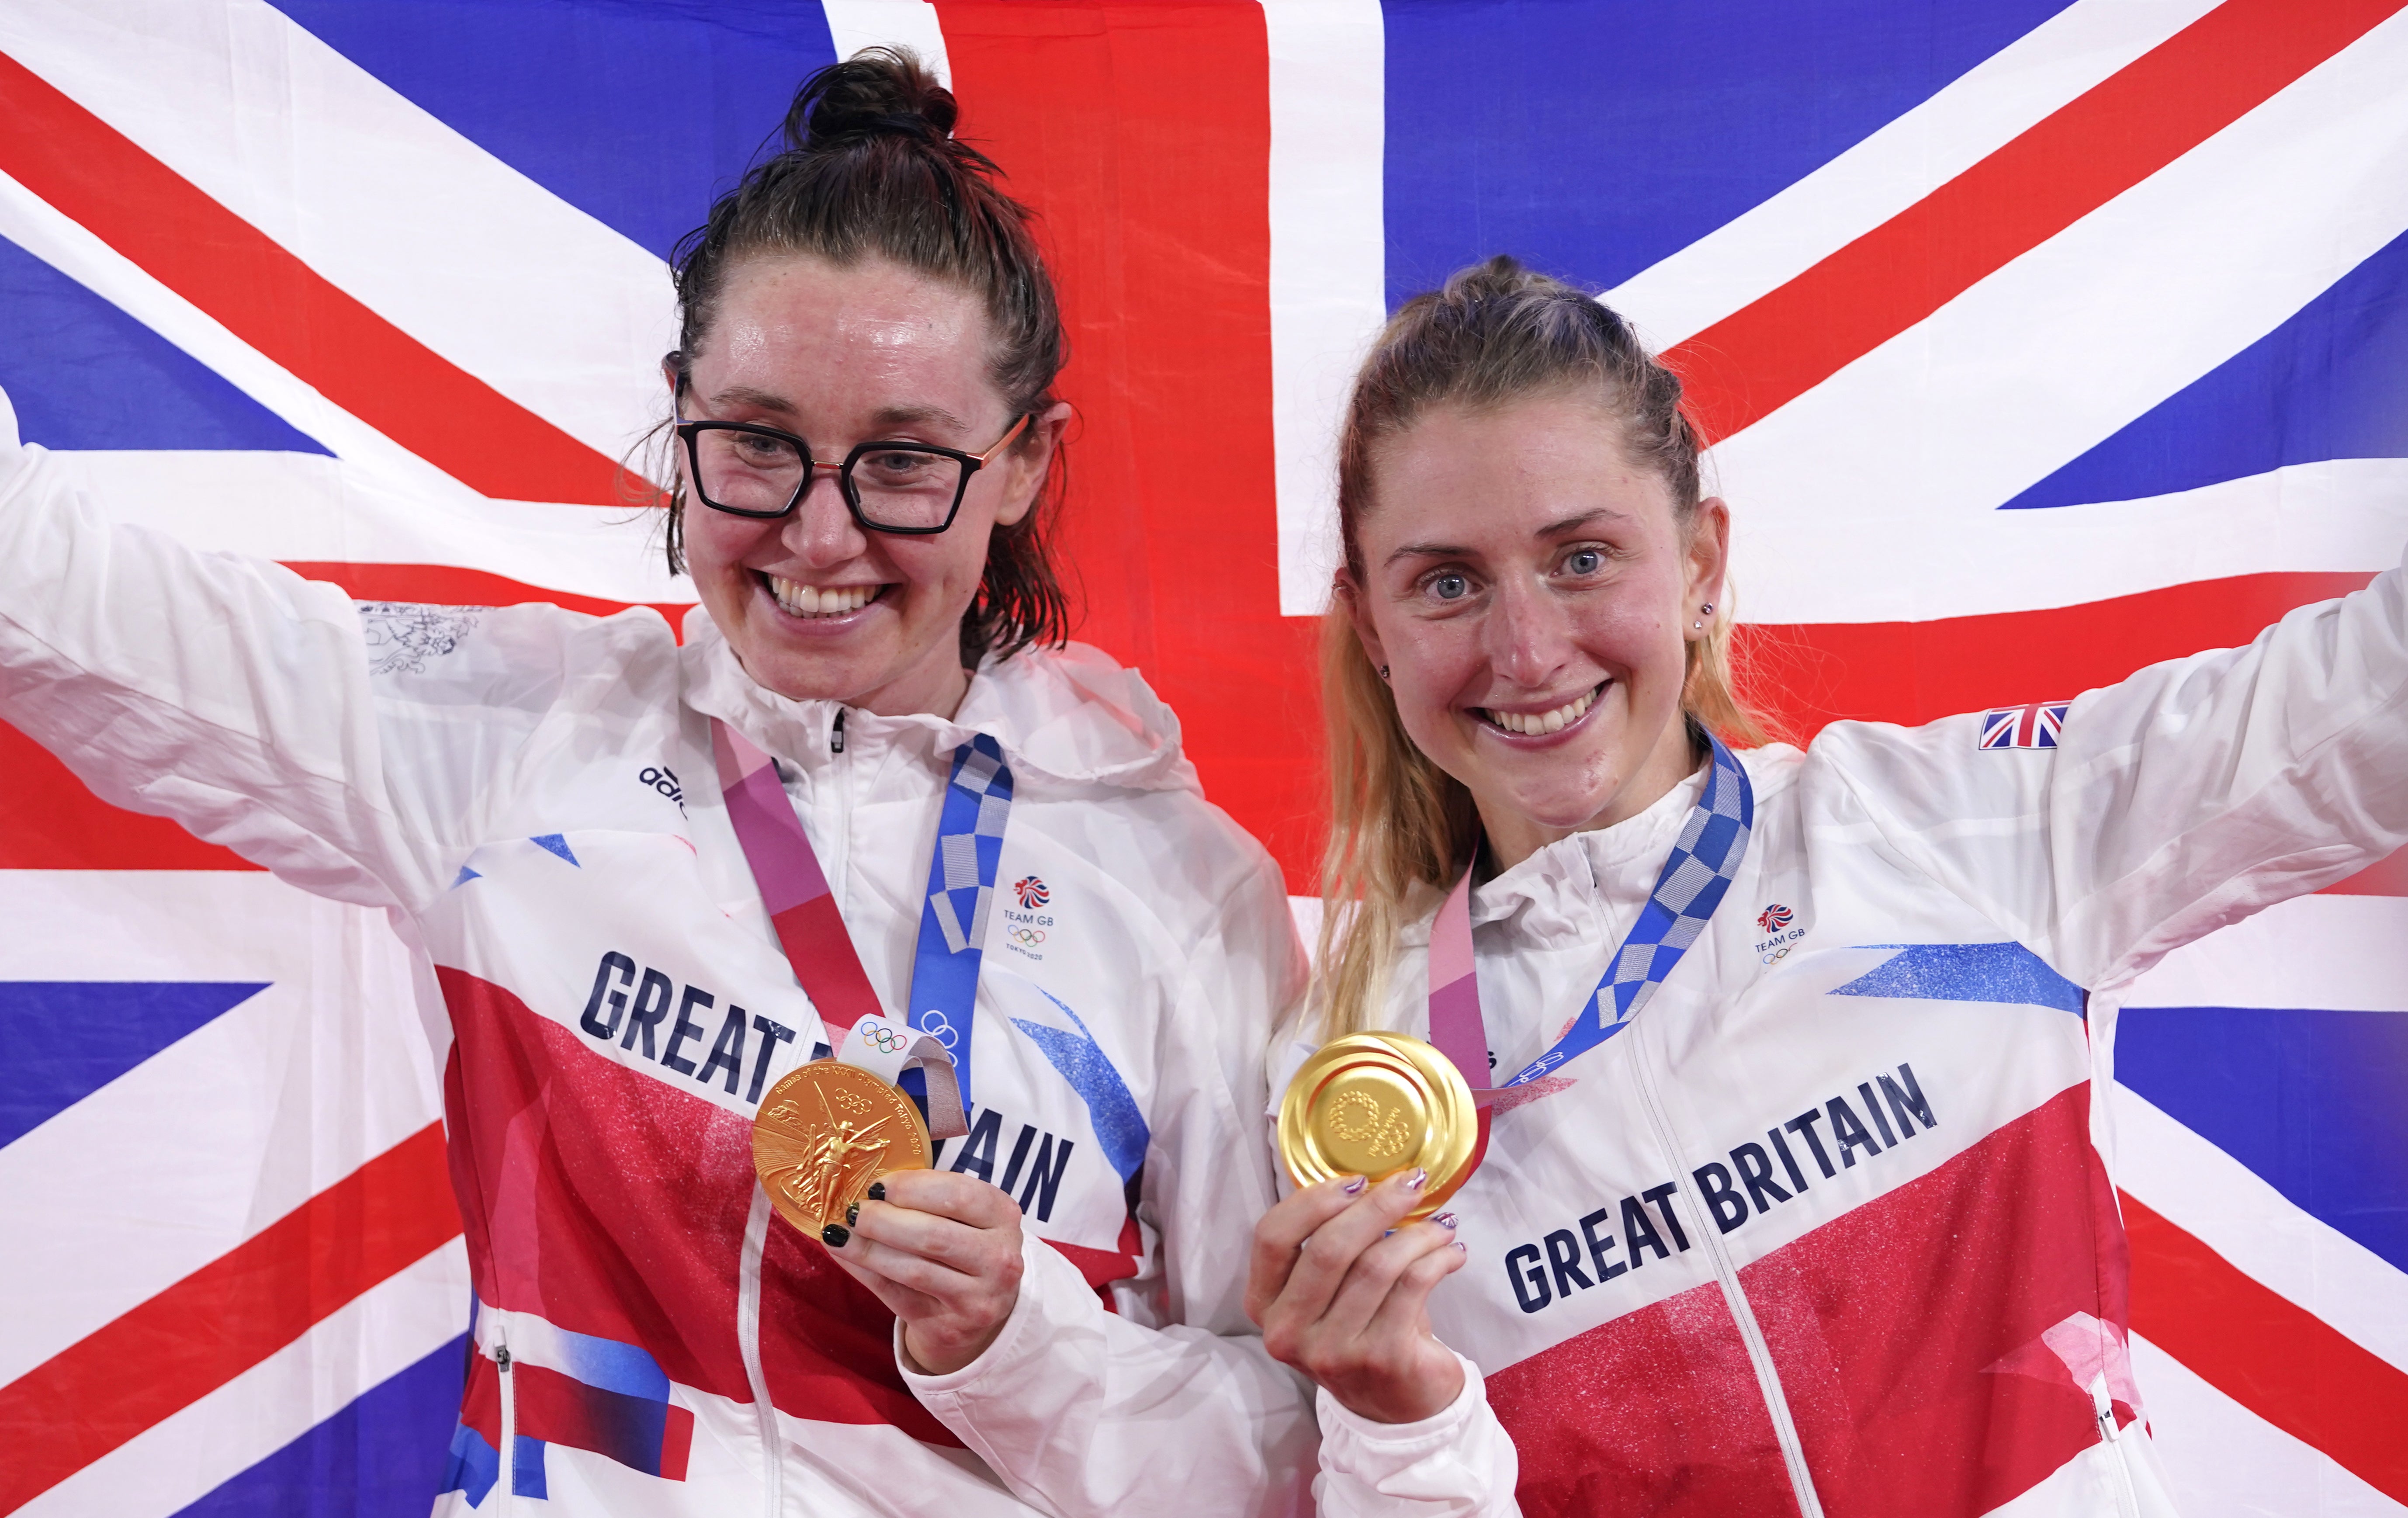 Laura Kenny (right) surpassed Dutchwoman Leontien Zijlaard-Van Moorsel to become the most successful female cyclist in Olympic history as she took gold at a third consecutive Games (Danny Lawson/PA)